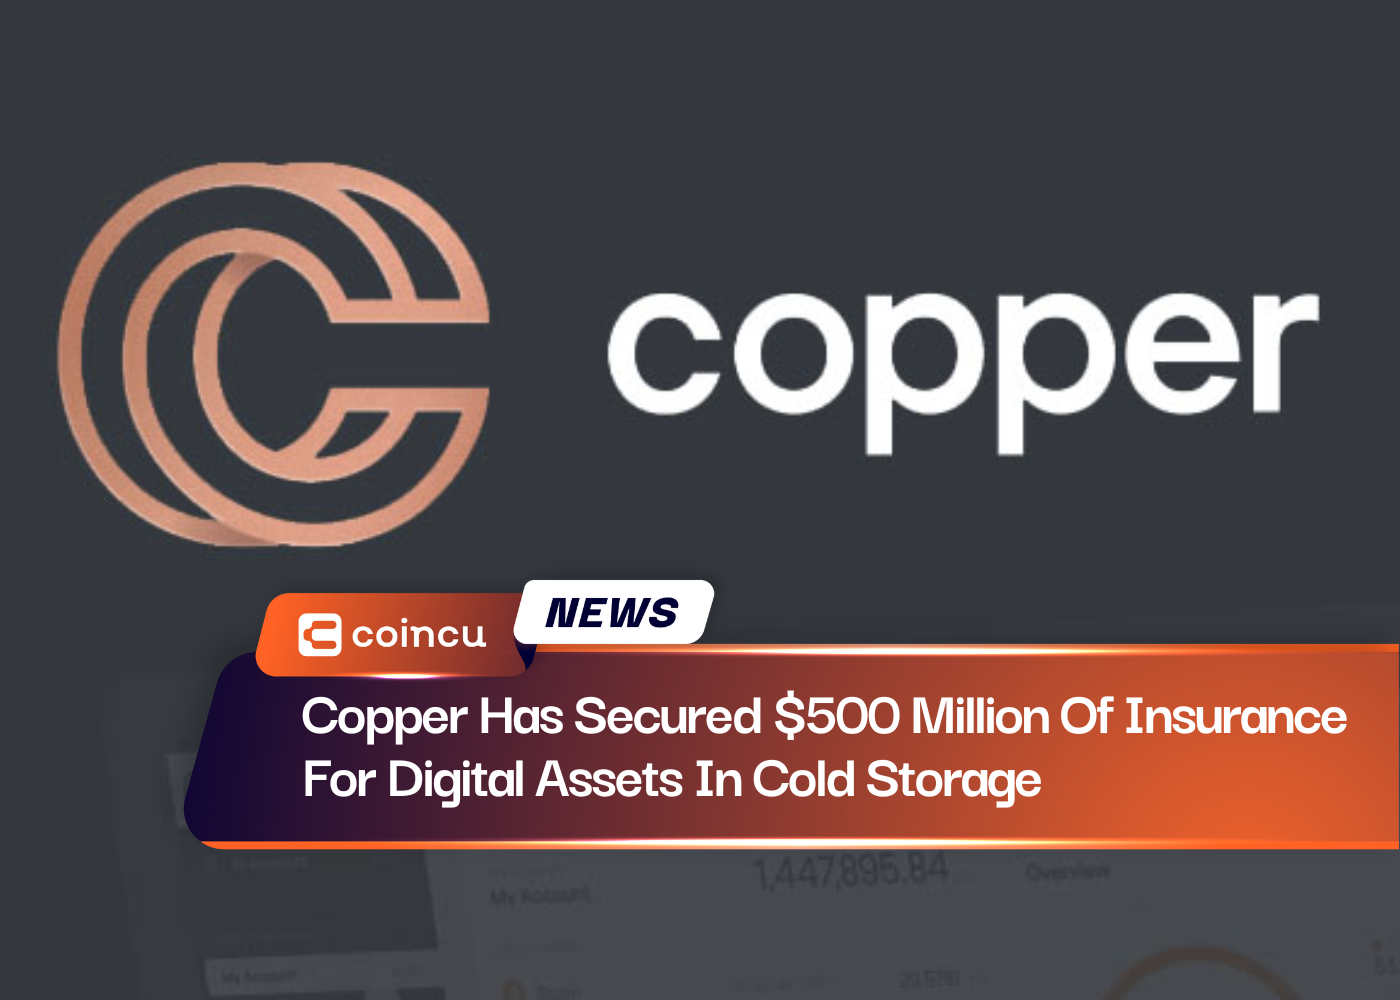 Copper Has Secured $500 Million Of Insurance For Digital Assets In Cold Storage